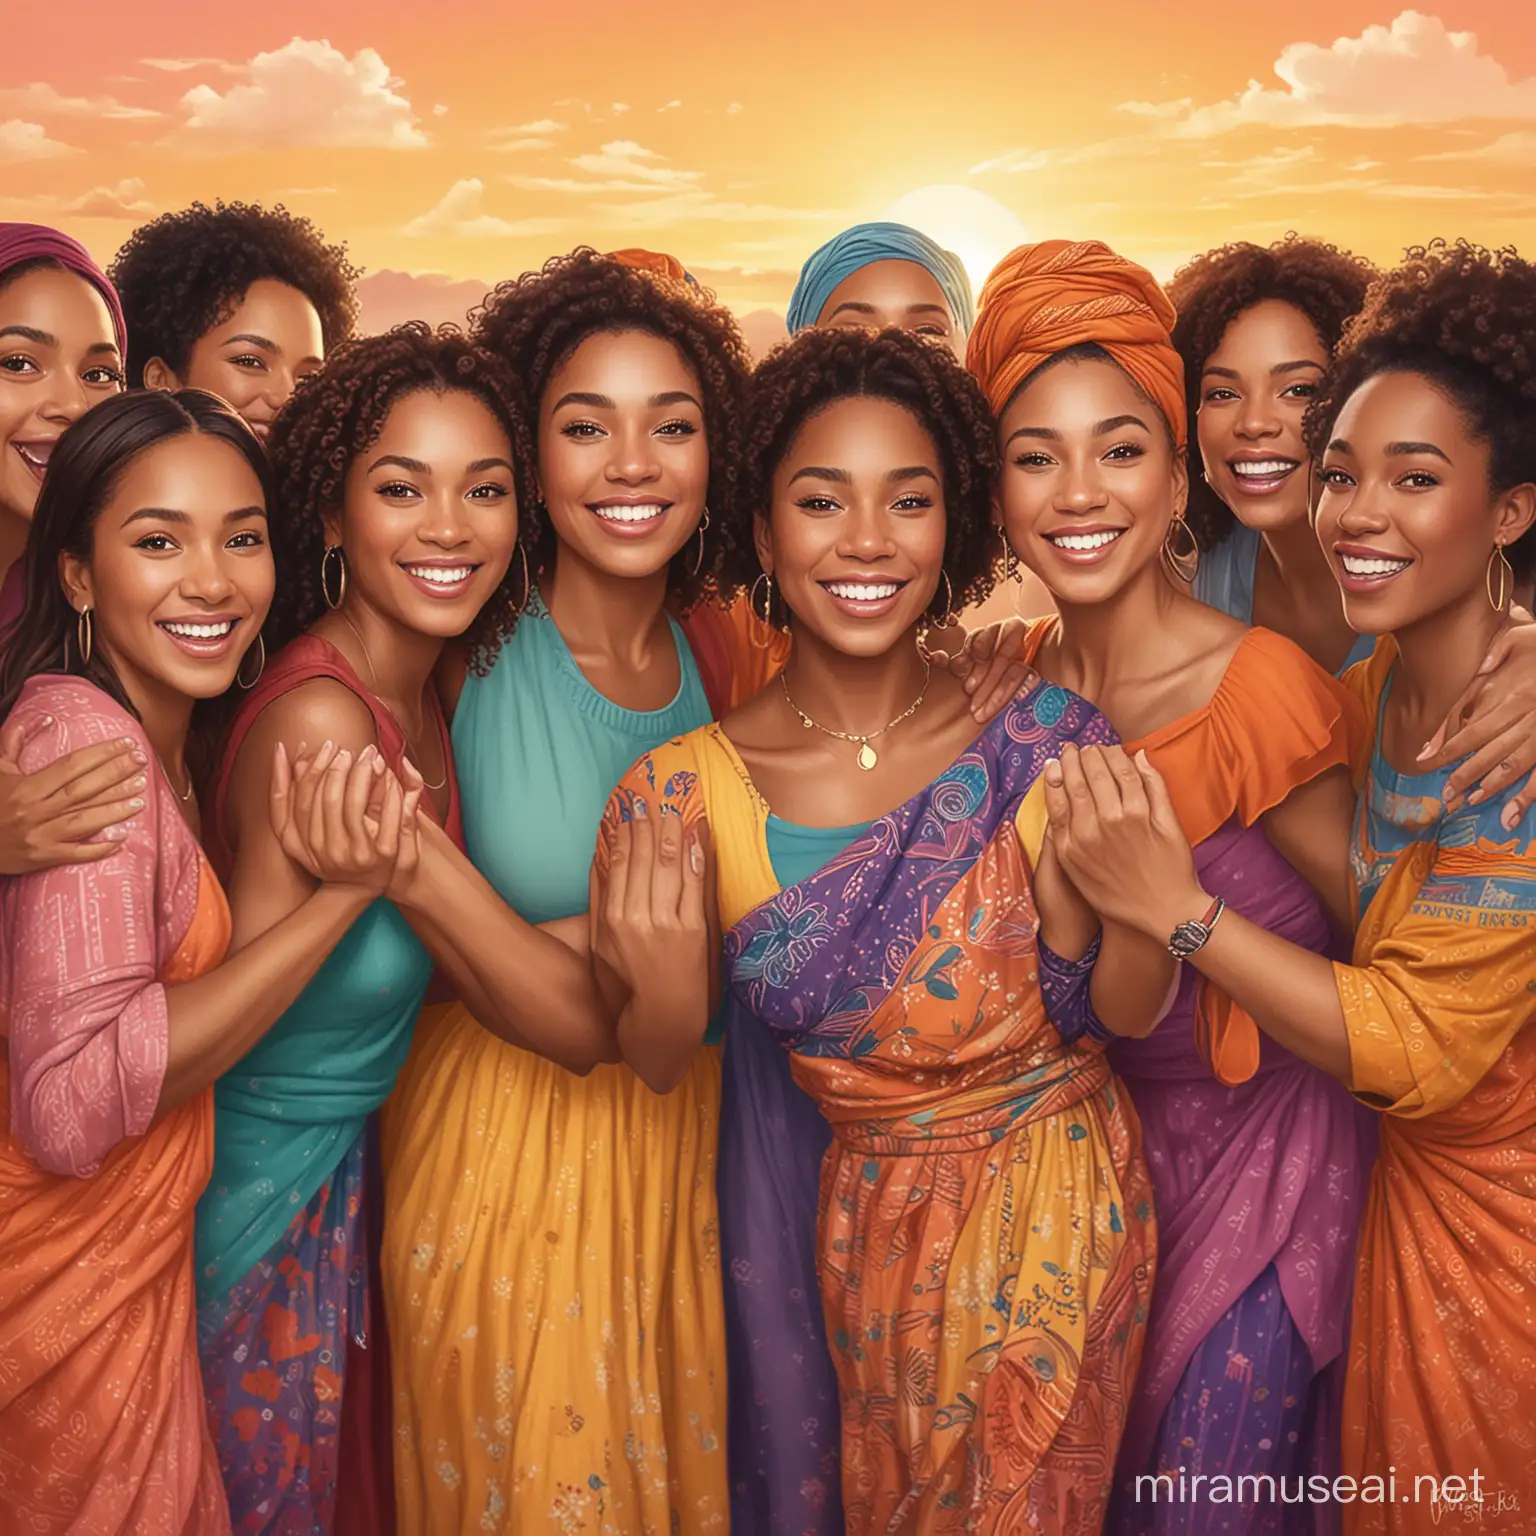 create an image regarding; Let's normalize kindness and empowerment among women. Compliment a friend, support a stranger, uplift a colleague. Small acts of love create waves of change. Together, we rise by lifting others. using diverse women with vibrant color